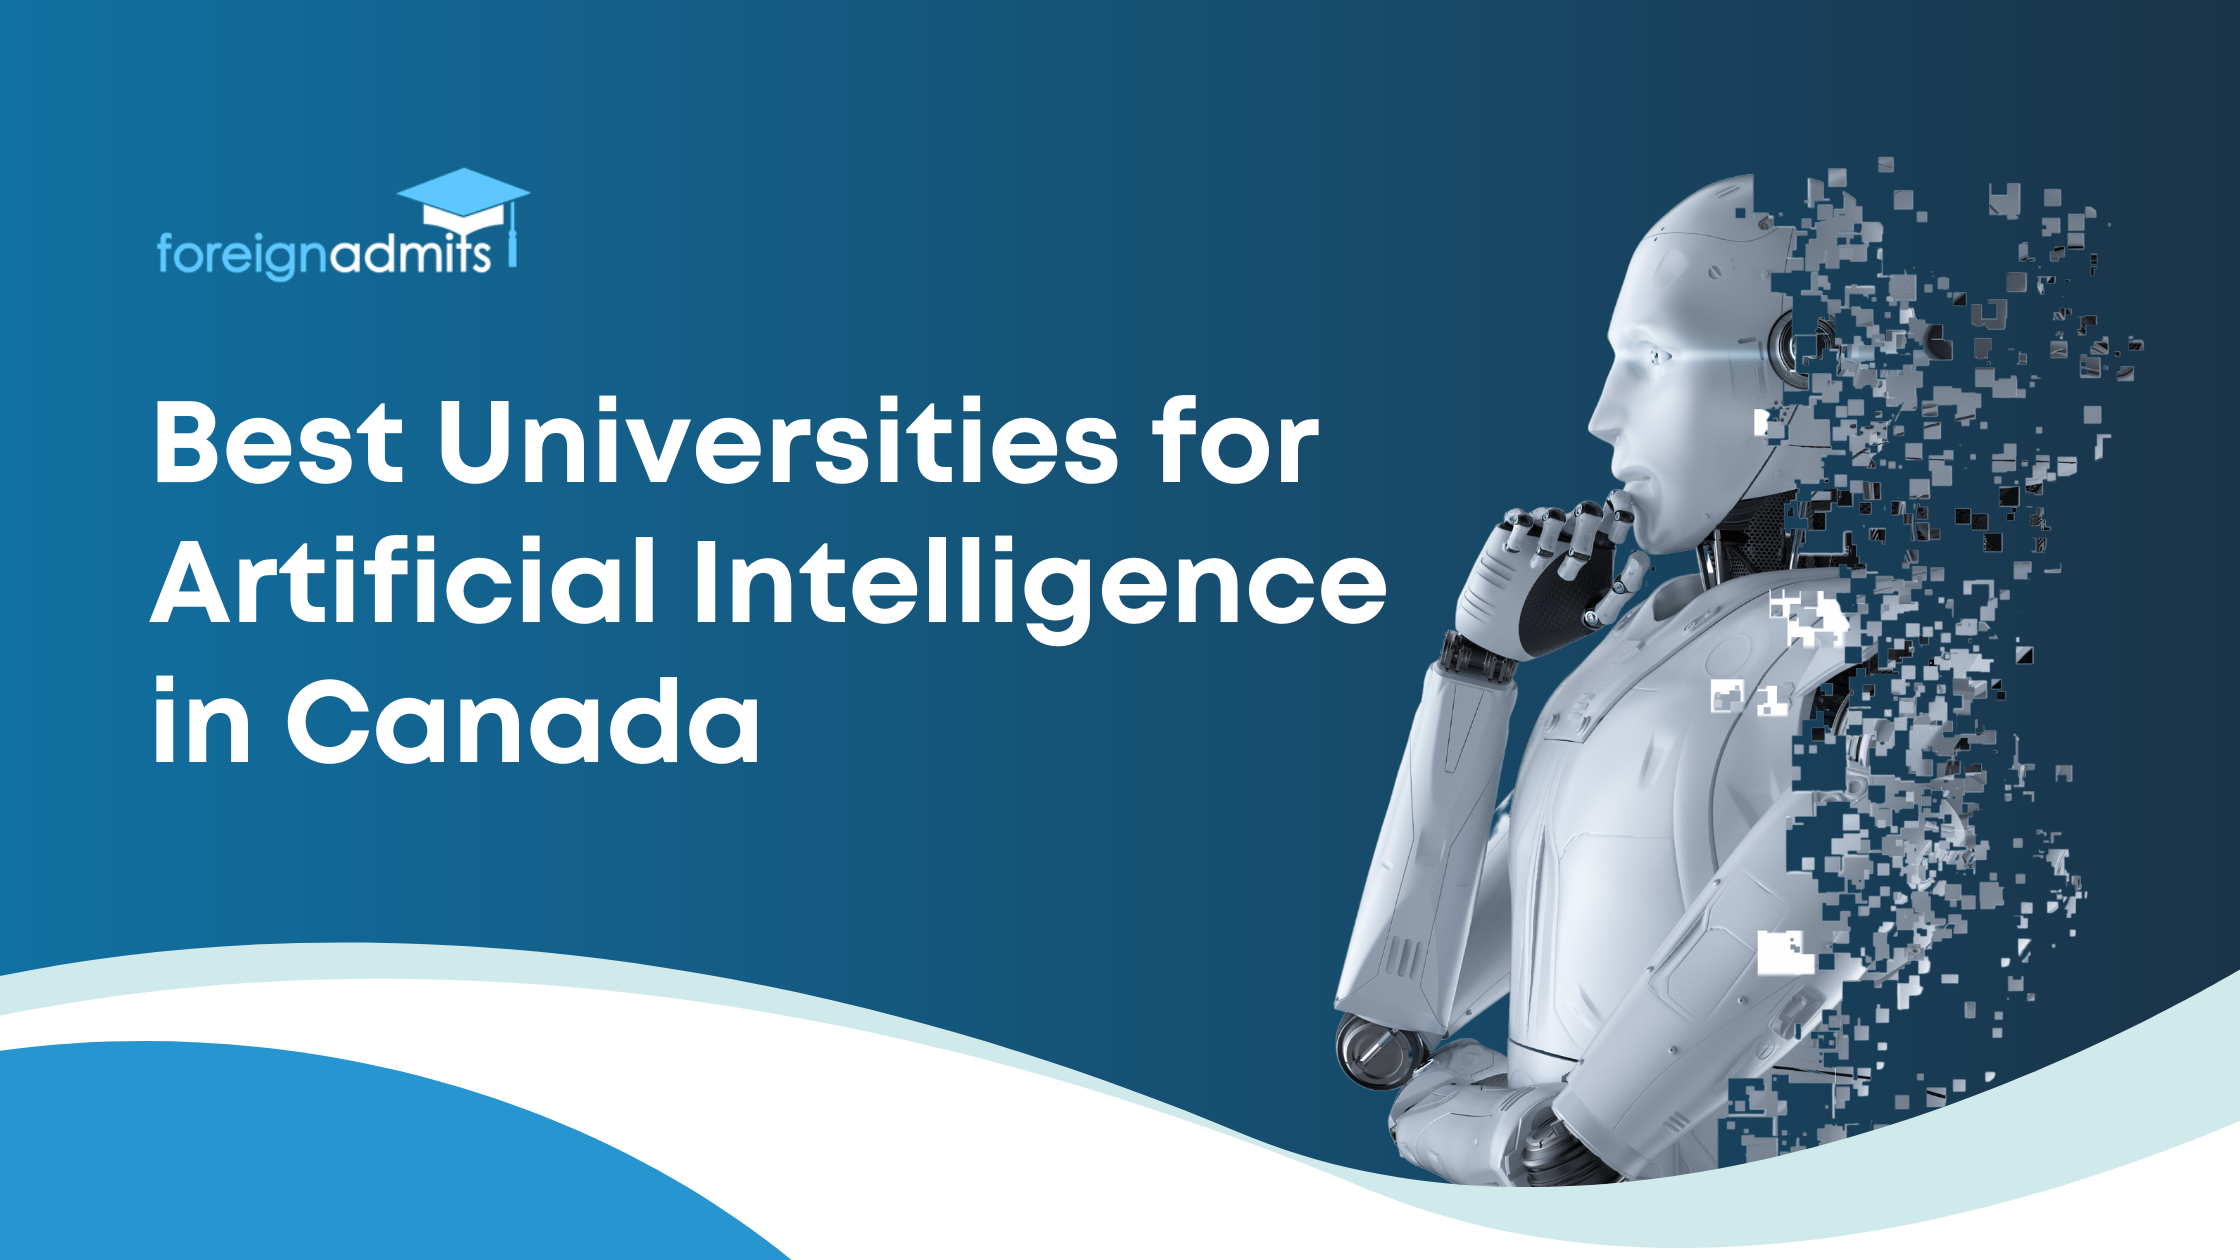 Best universities for Artificial Intelligence in Canada